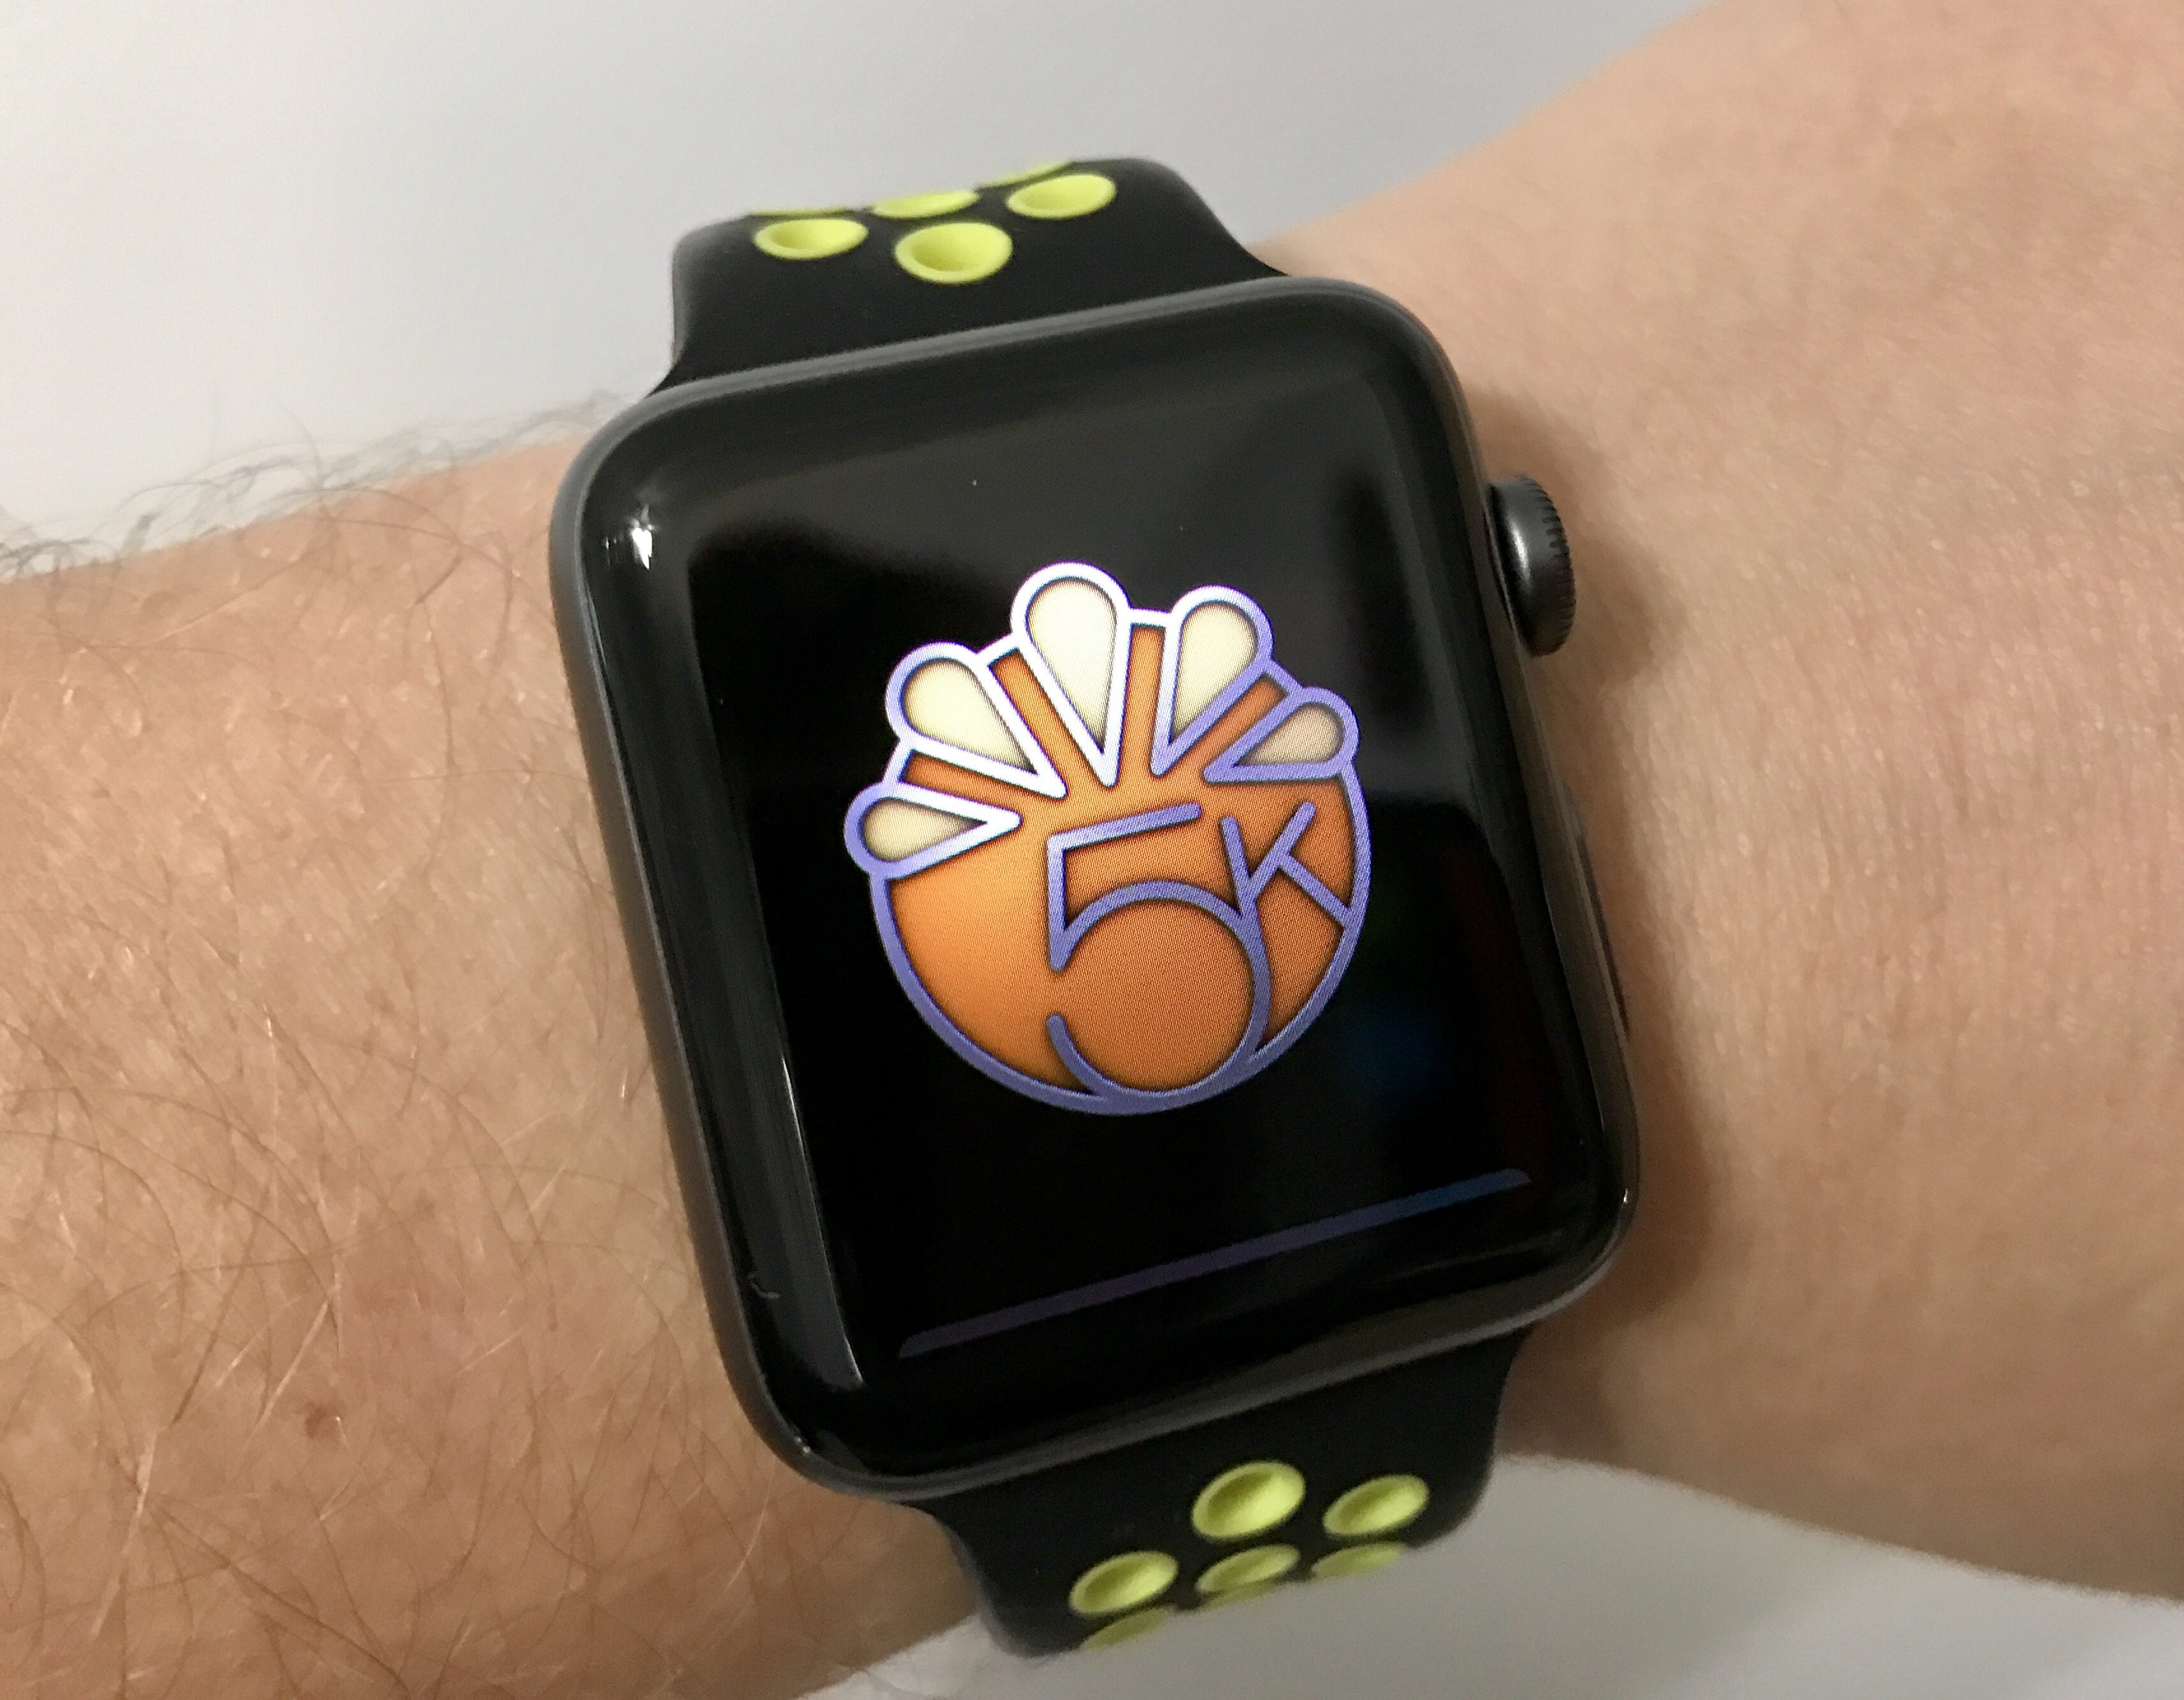 Earn a special Activity Challenge medal and an iMessage sticker when you run a 5k on Thanksgiving Day.